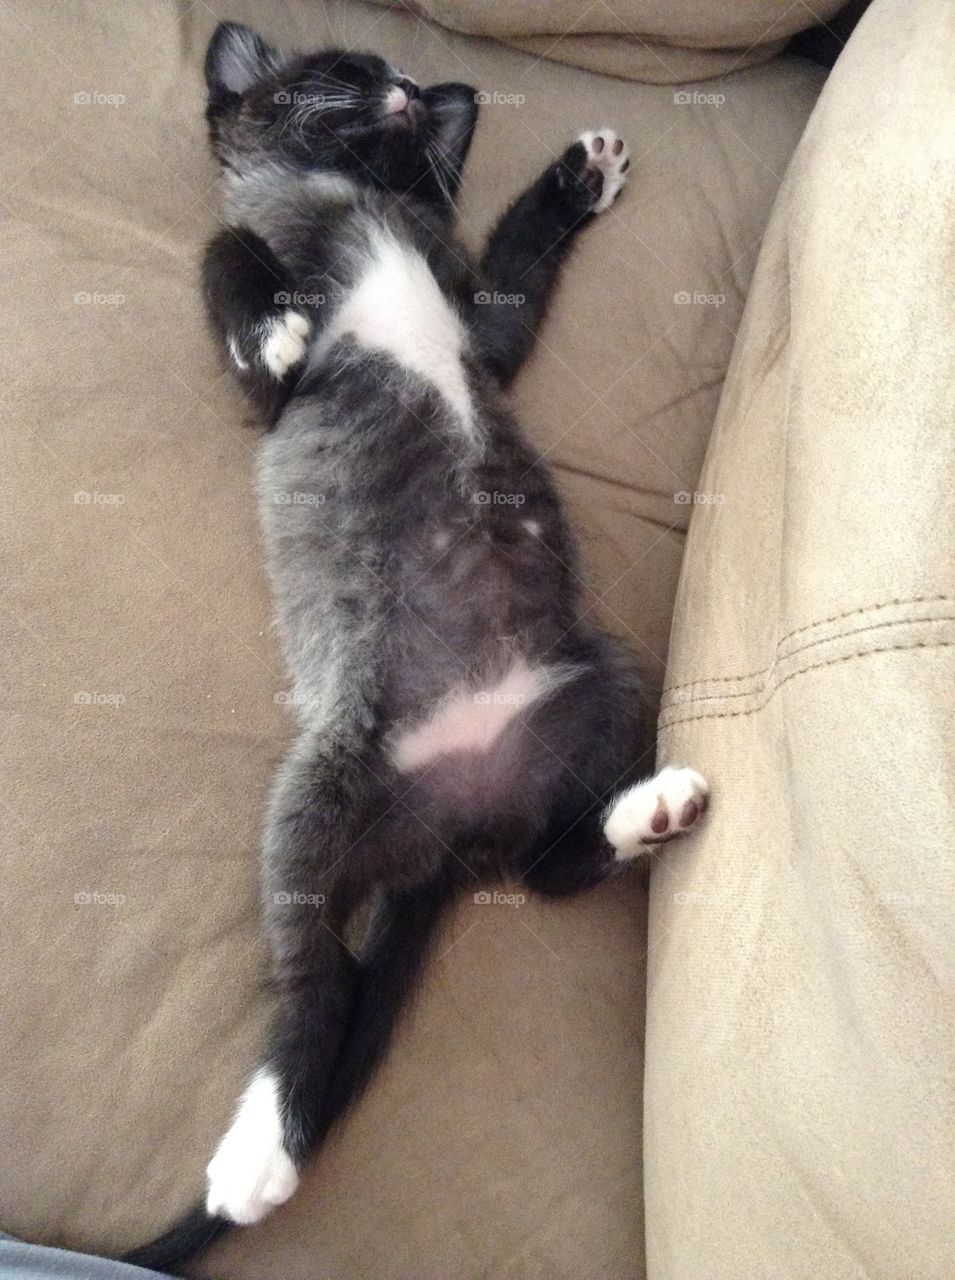 Stretched out kitten